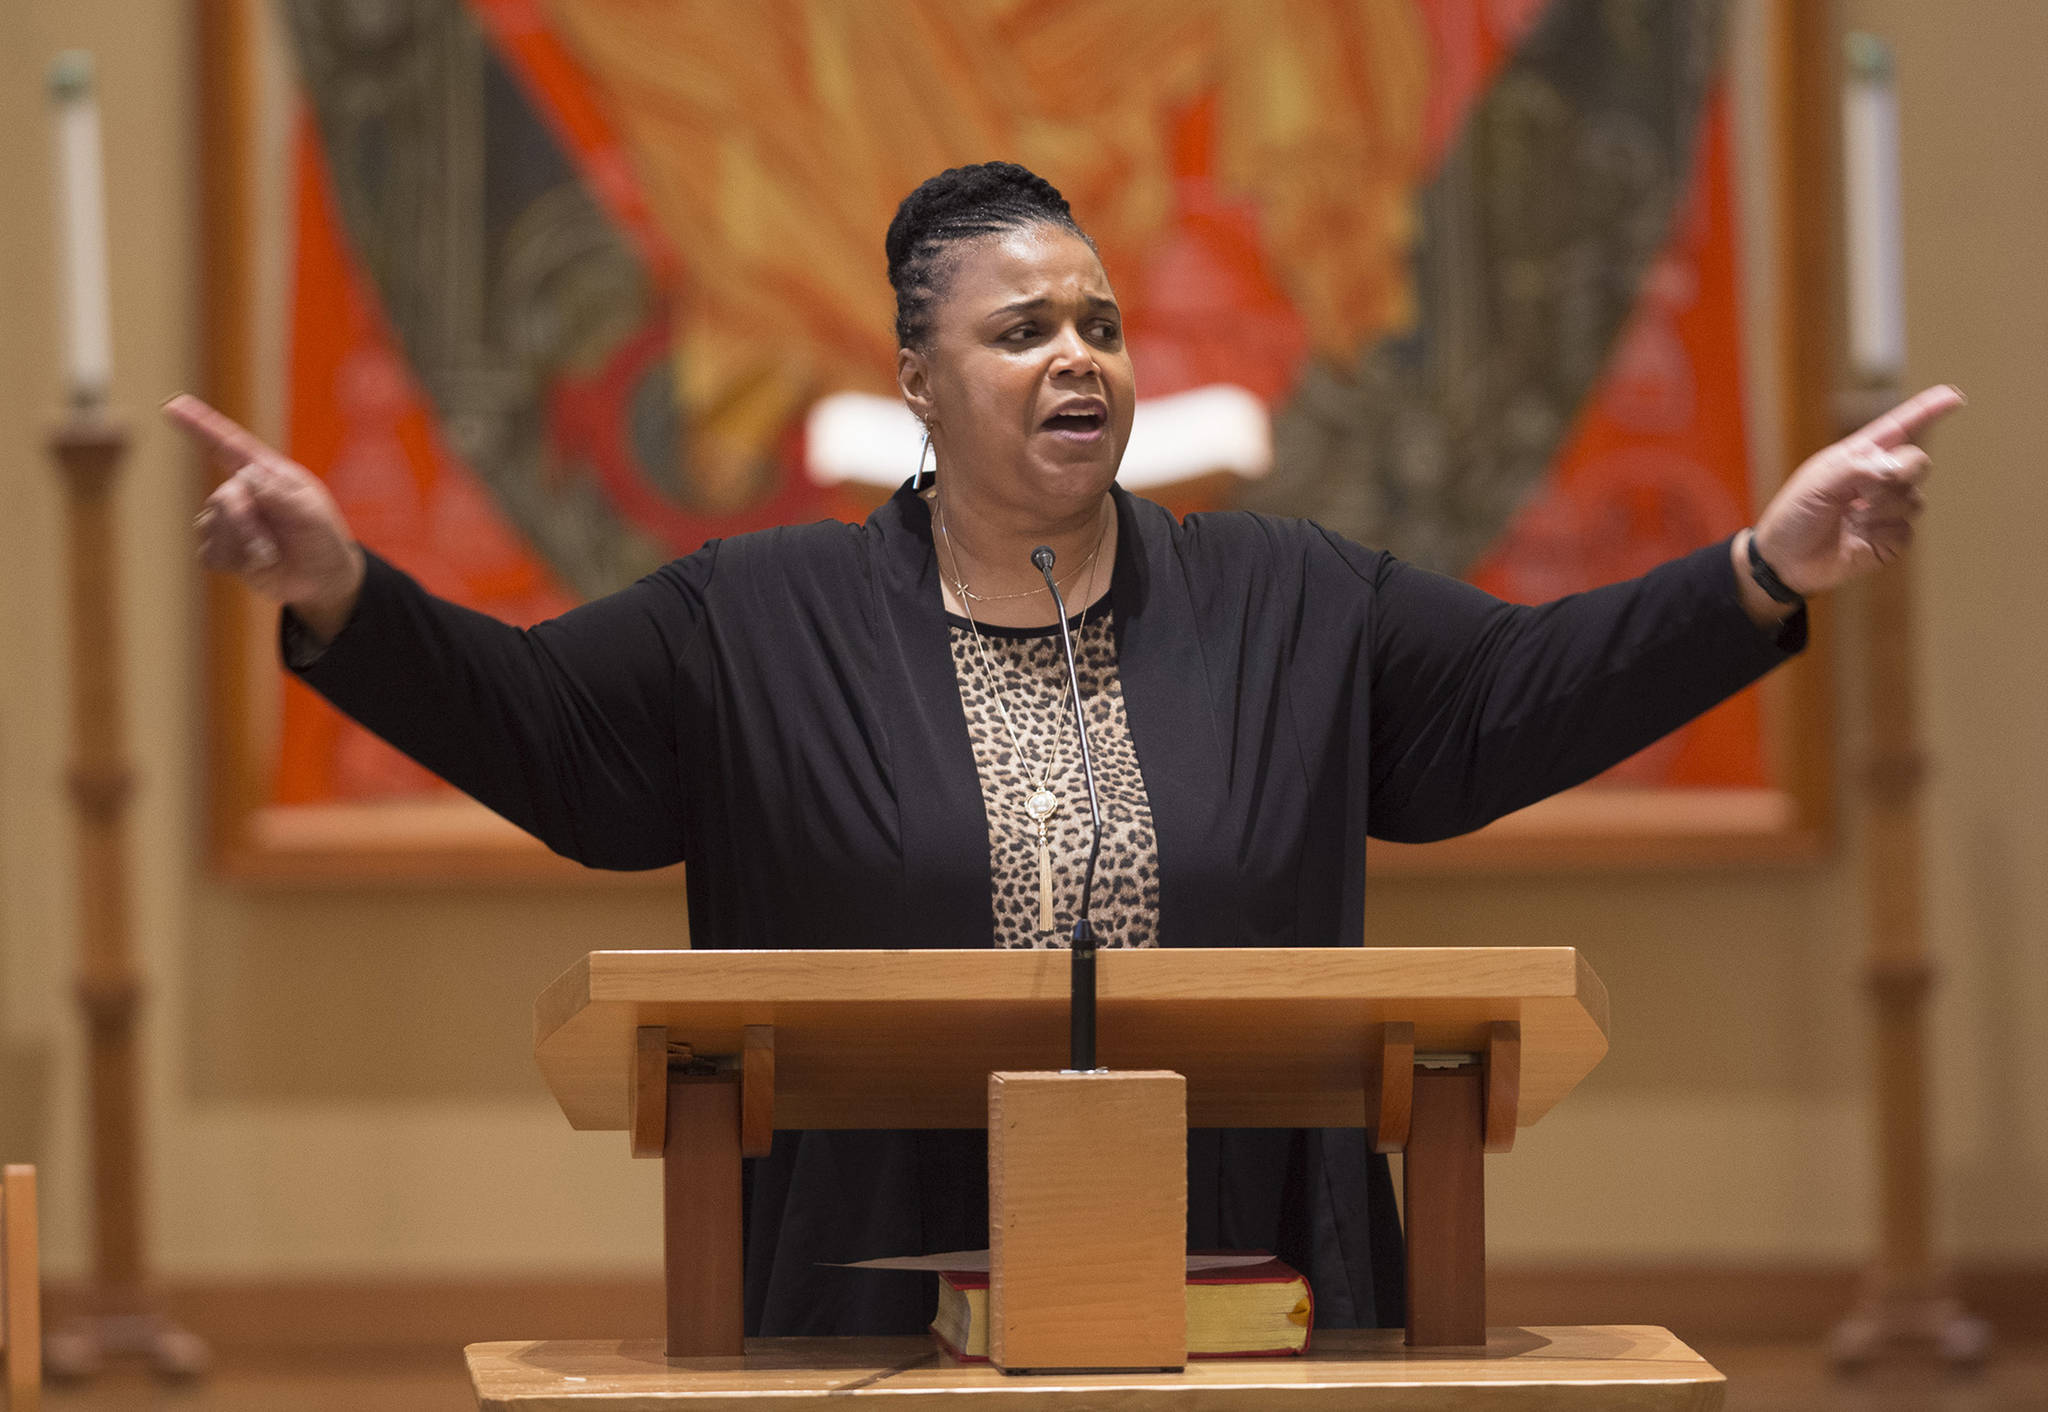 Michael Penn | Juneau Empire File                                Sherry Patterson, president of the Black Awareness Association, gives the keynote address to Juneau residents during the Martin Luther King Jr. 2018 Community Celebration sponsored by the Black Awareness Association at St. Paul’s Catholic Church. The 2020 celebration is Monday.